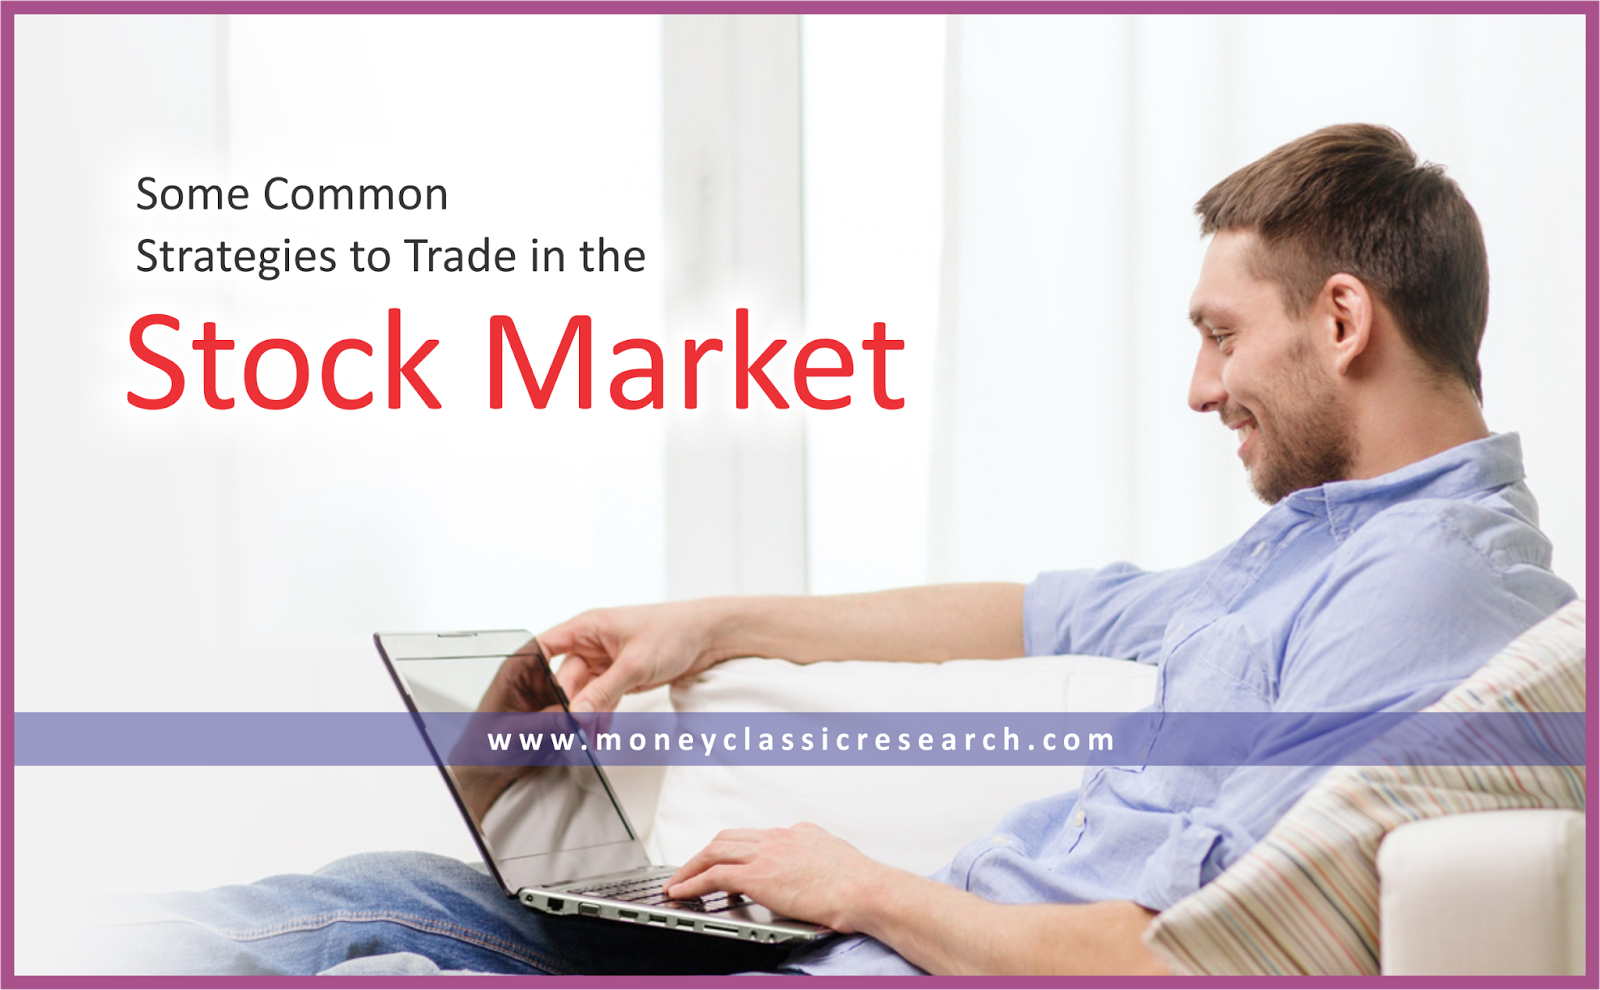 Some Common Strategies to Trade in the Stock Market - Money Classic